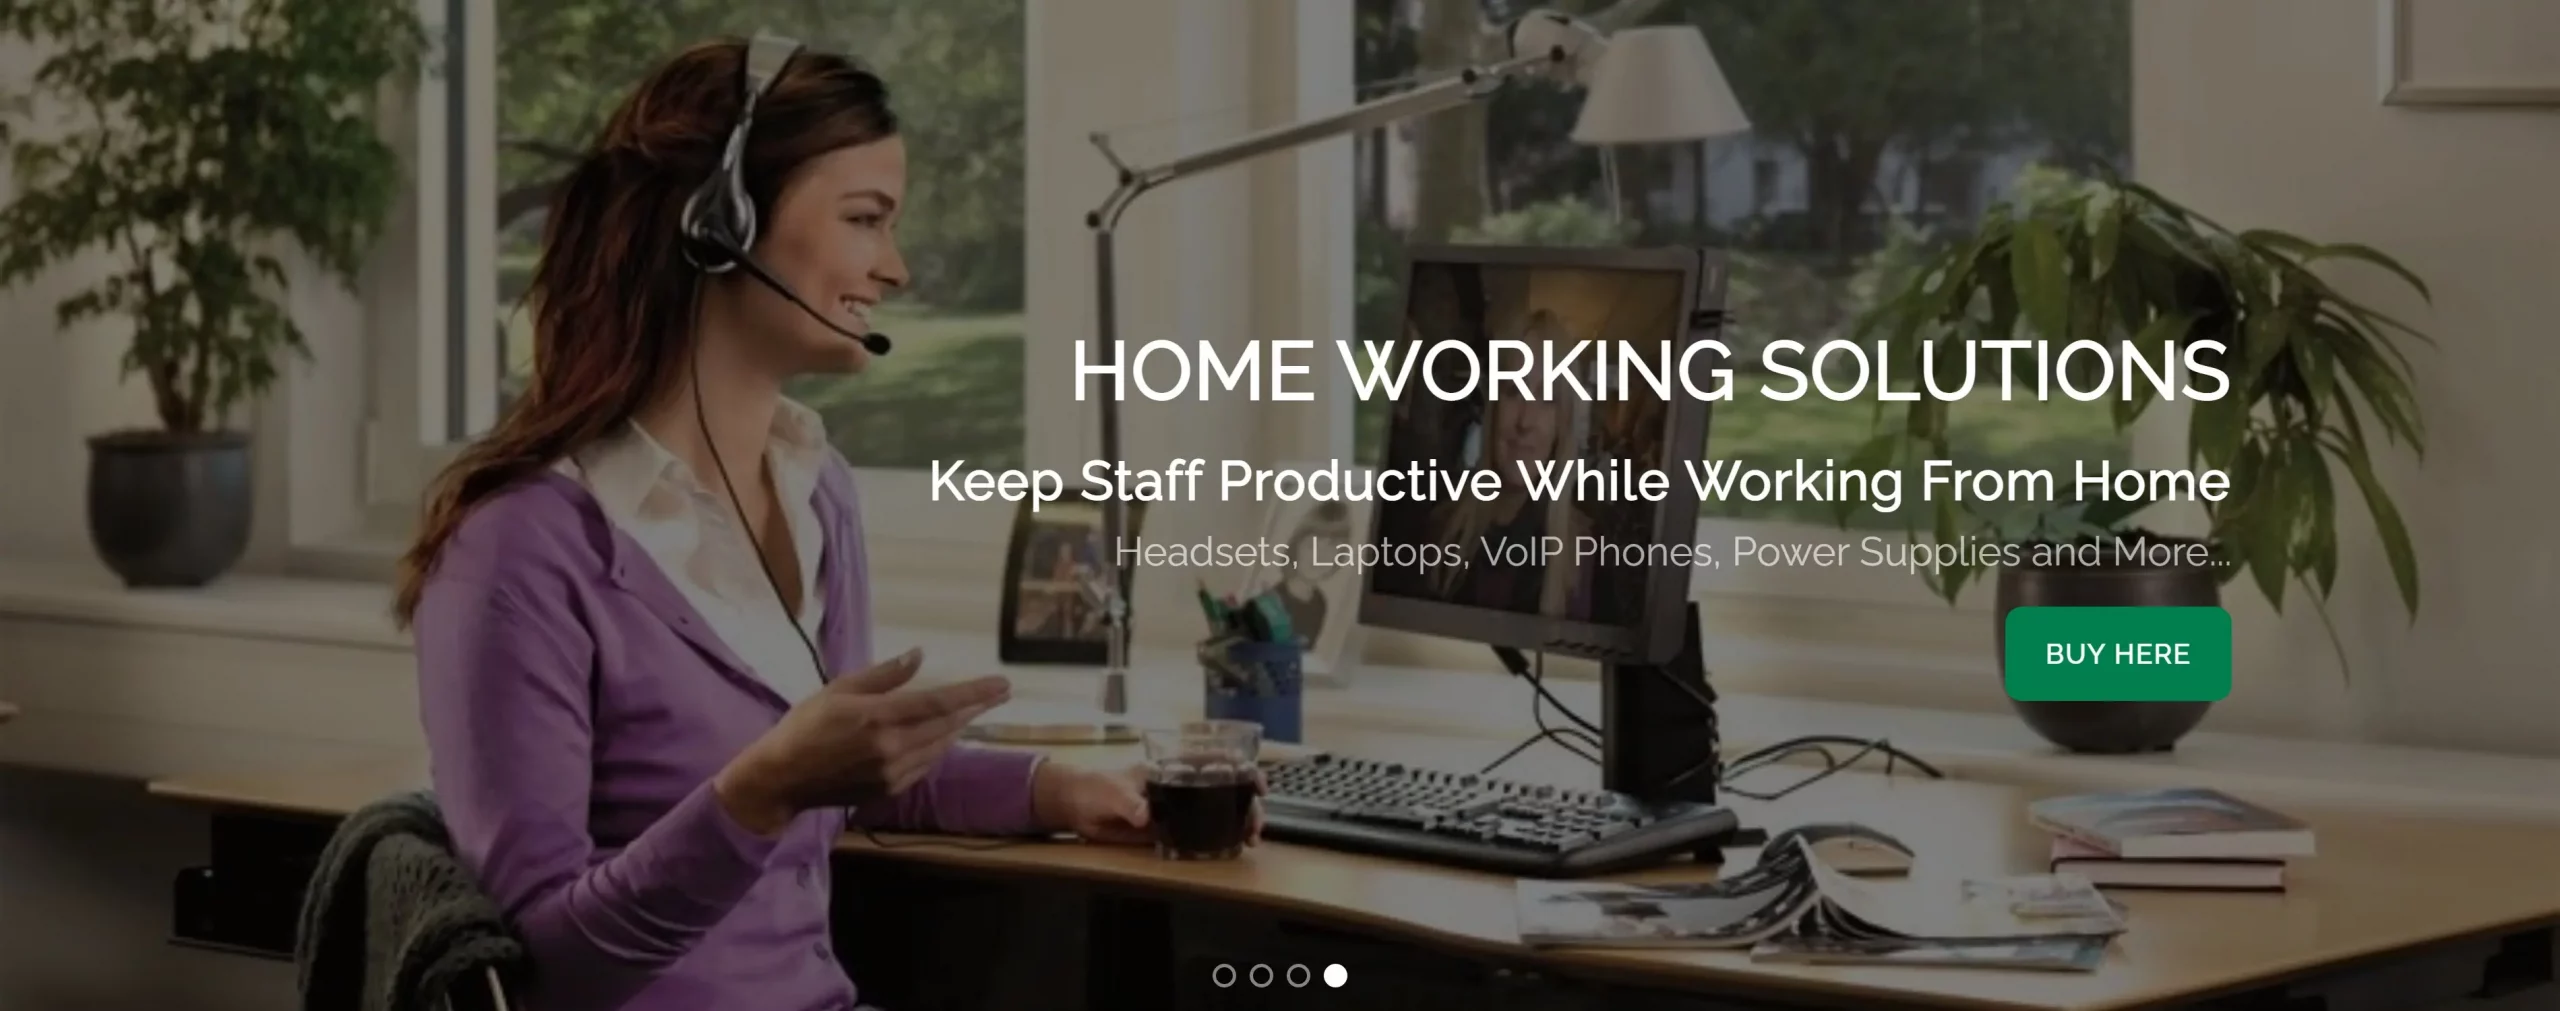 Home Working Solutions